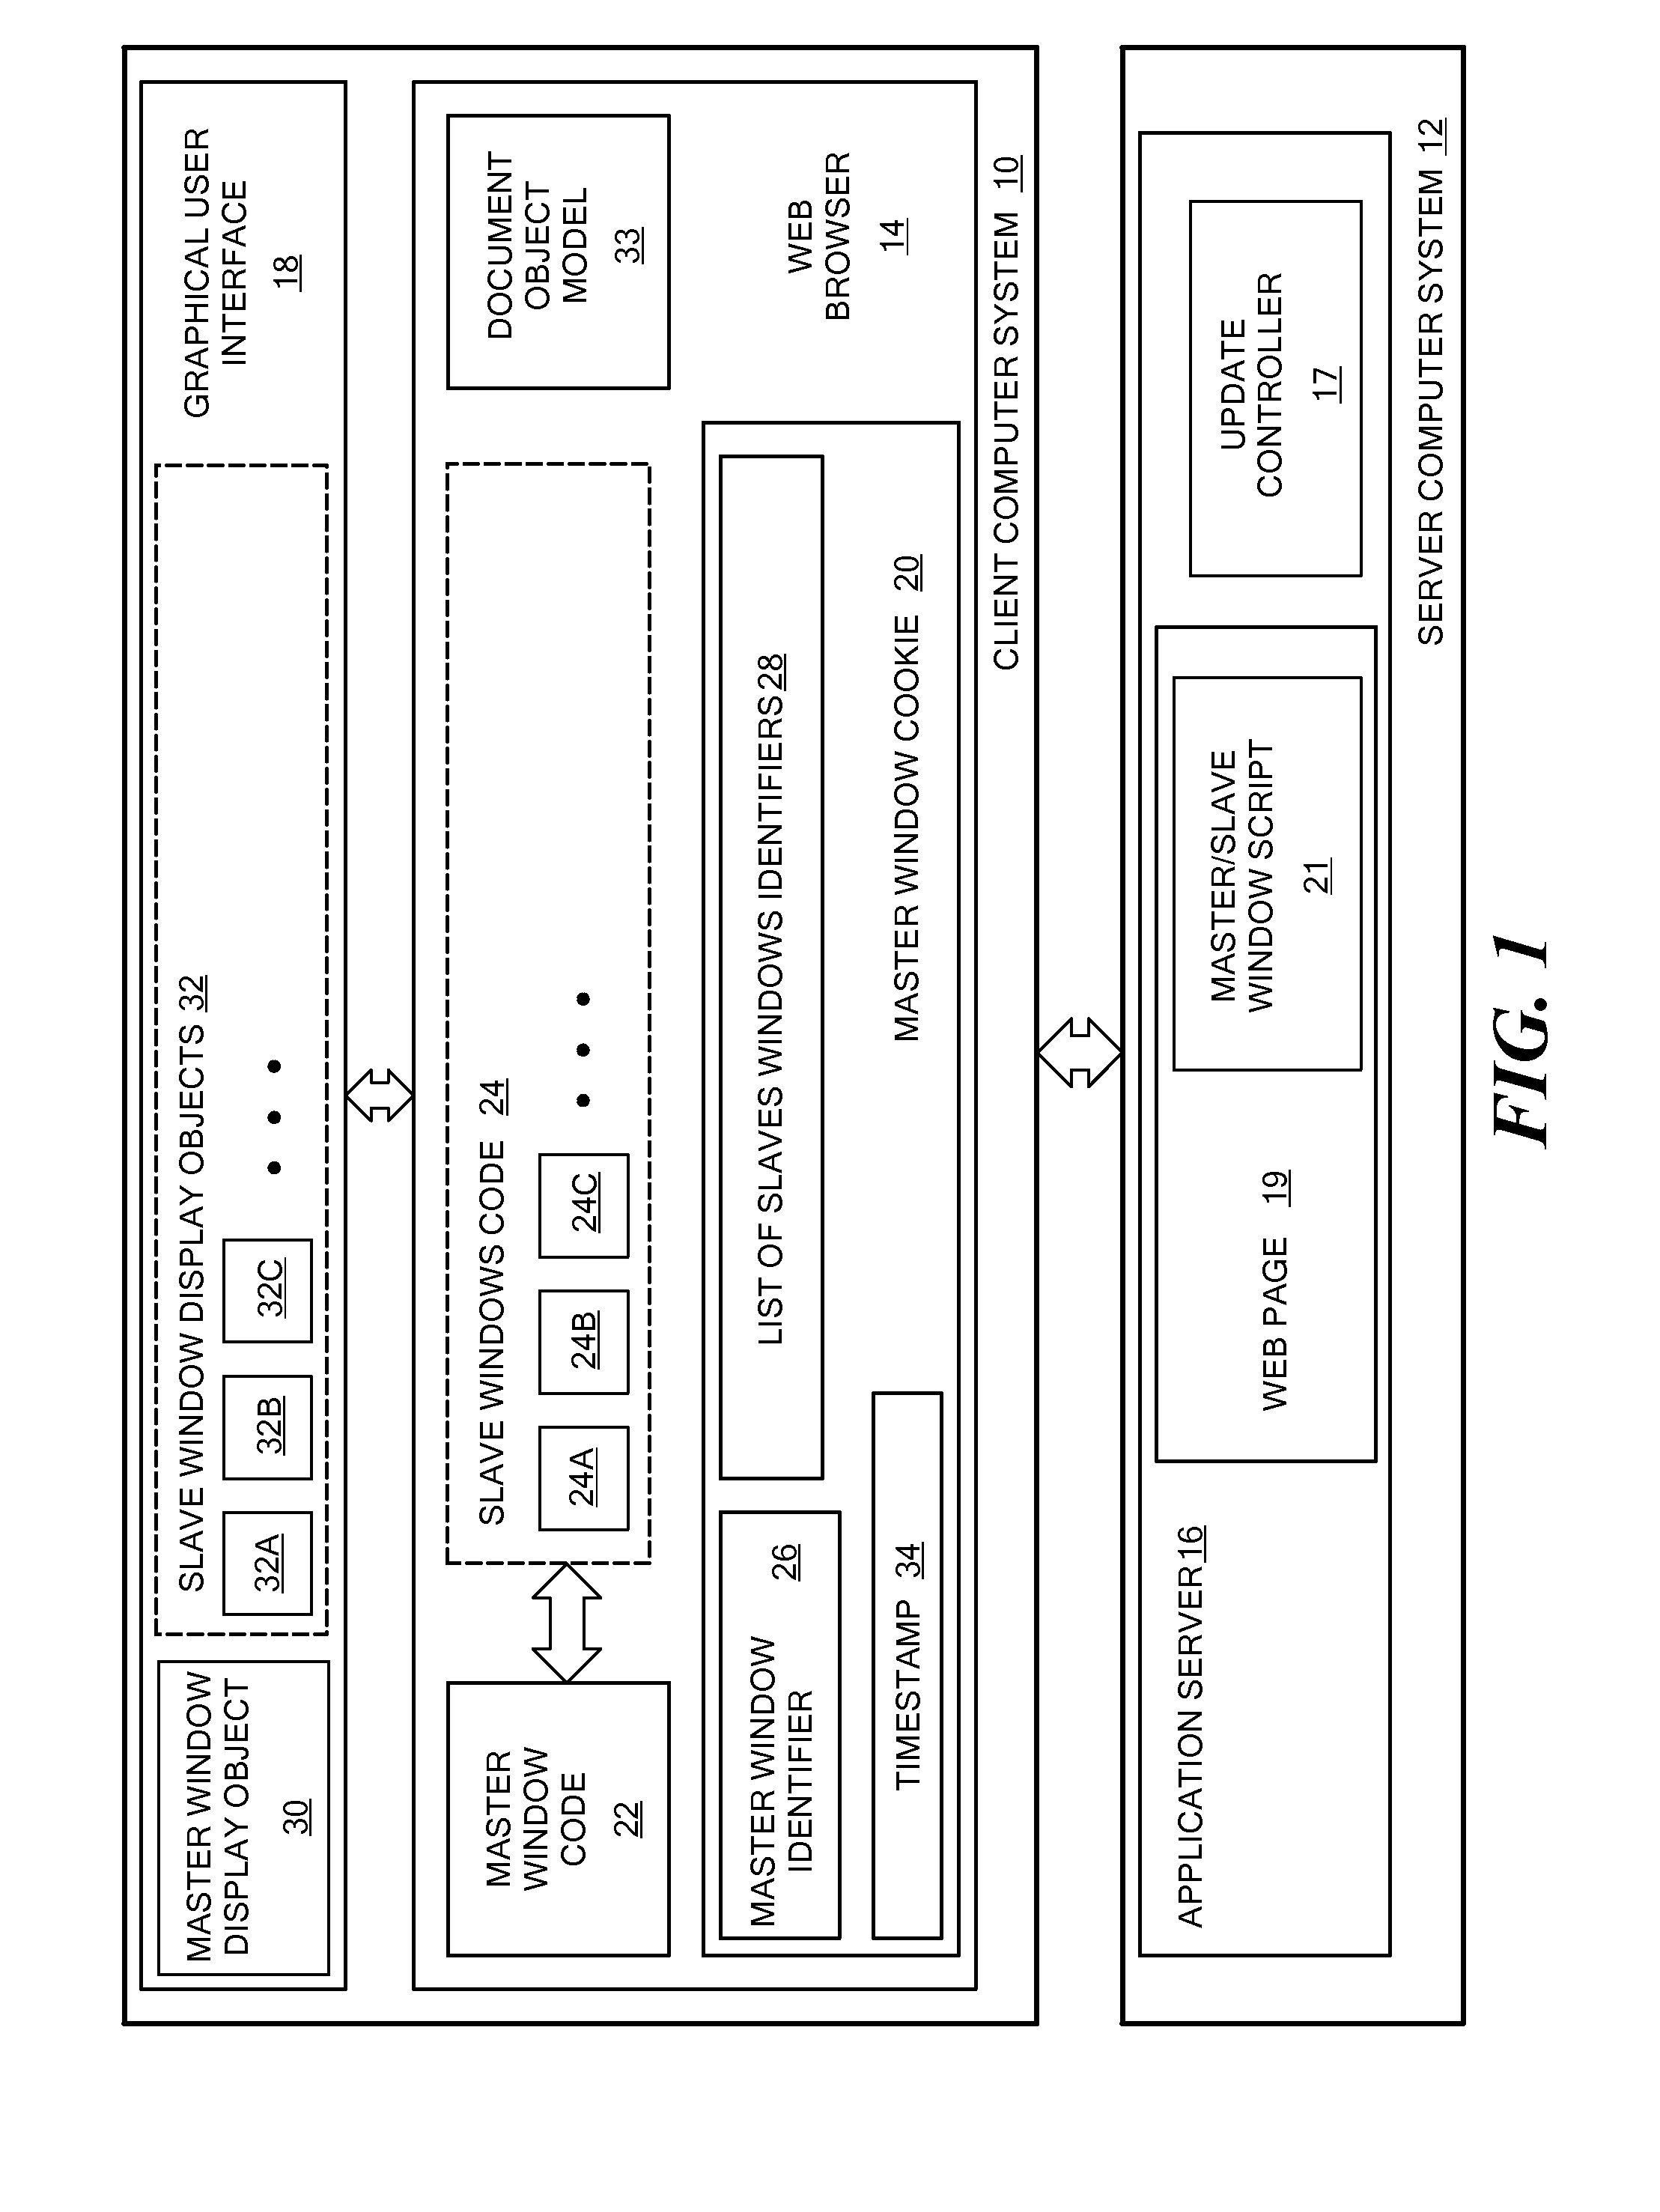 Method and system for dispatching events to multiple browser windows/tabs using a single connection